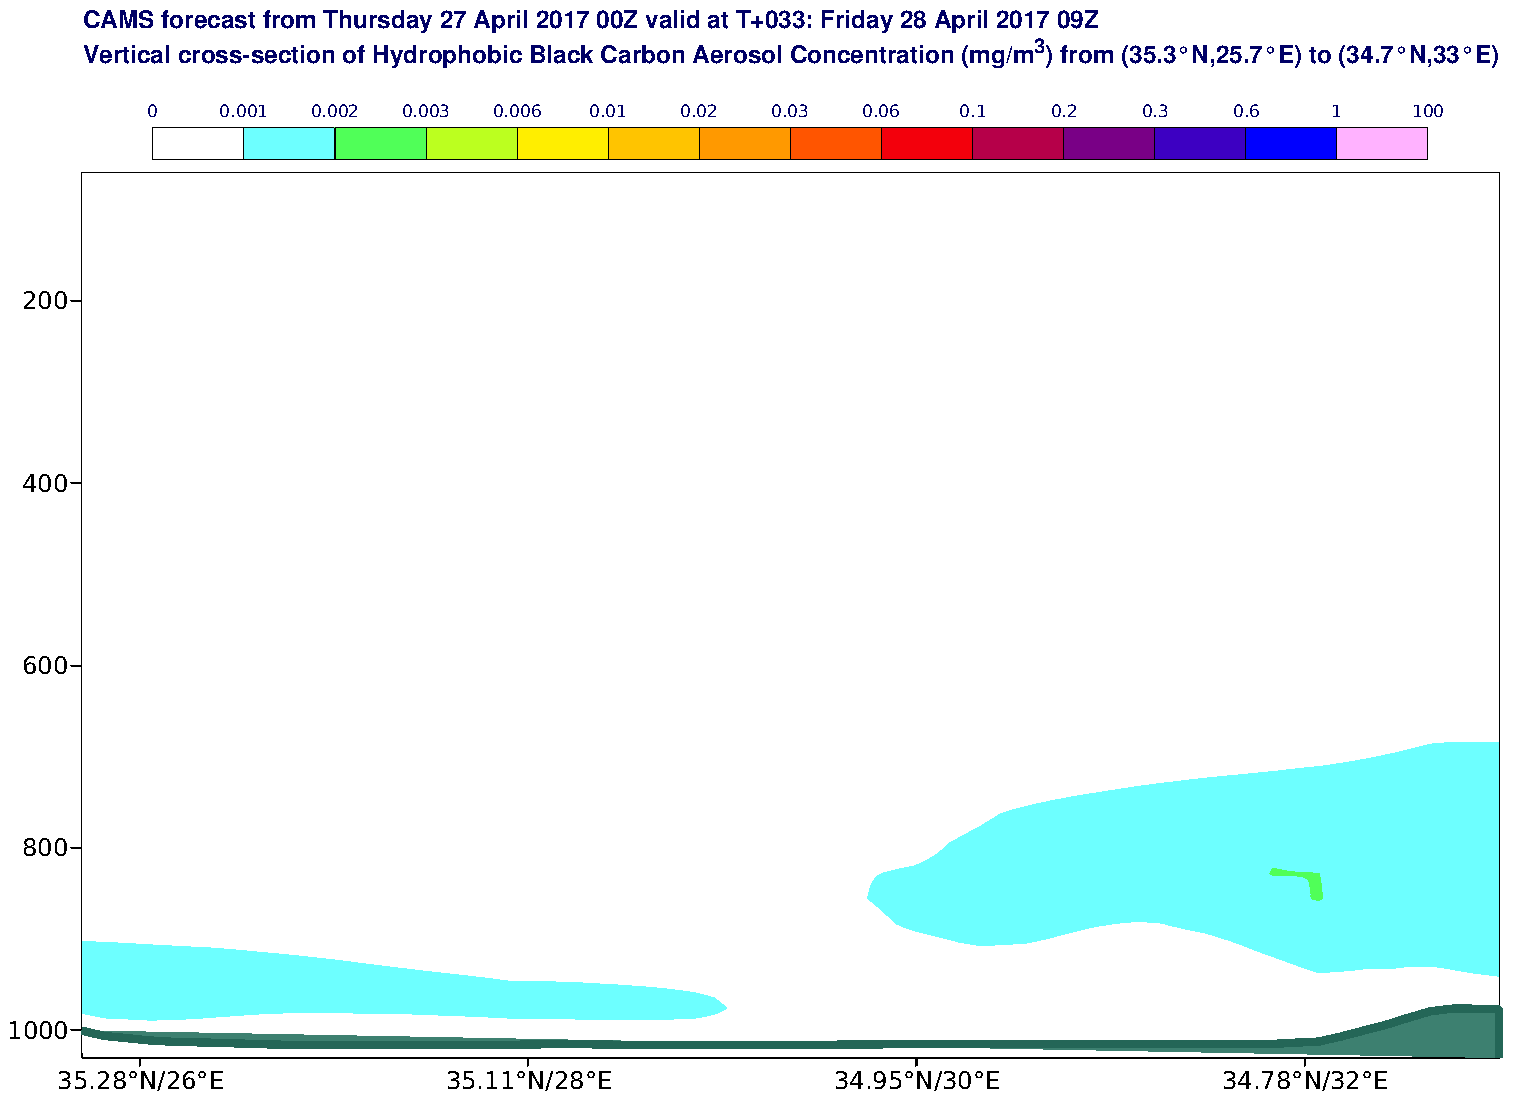 Vertical cross-section of Hydrophobic Black Carbon Aerosol Concentration (mg/m3) valid at T33 - 2017-04-28 09:00